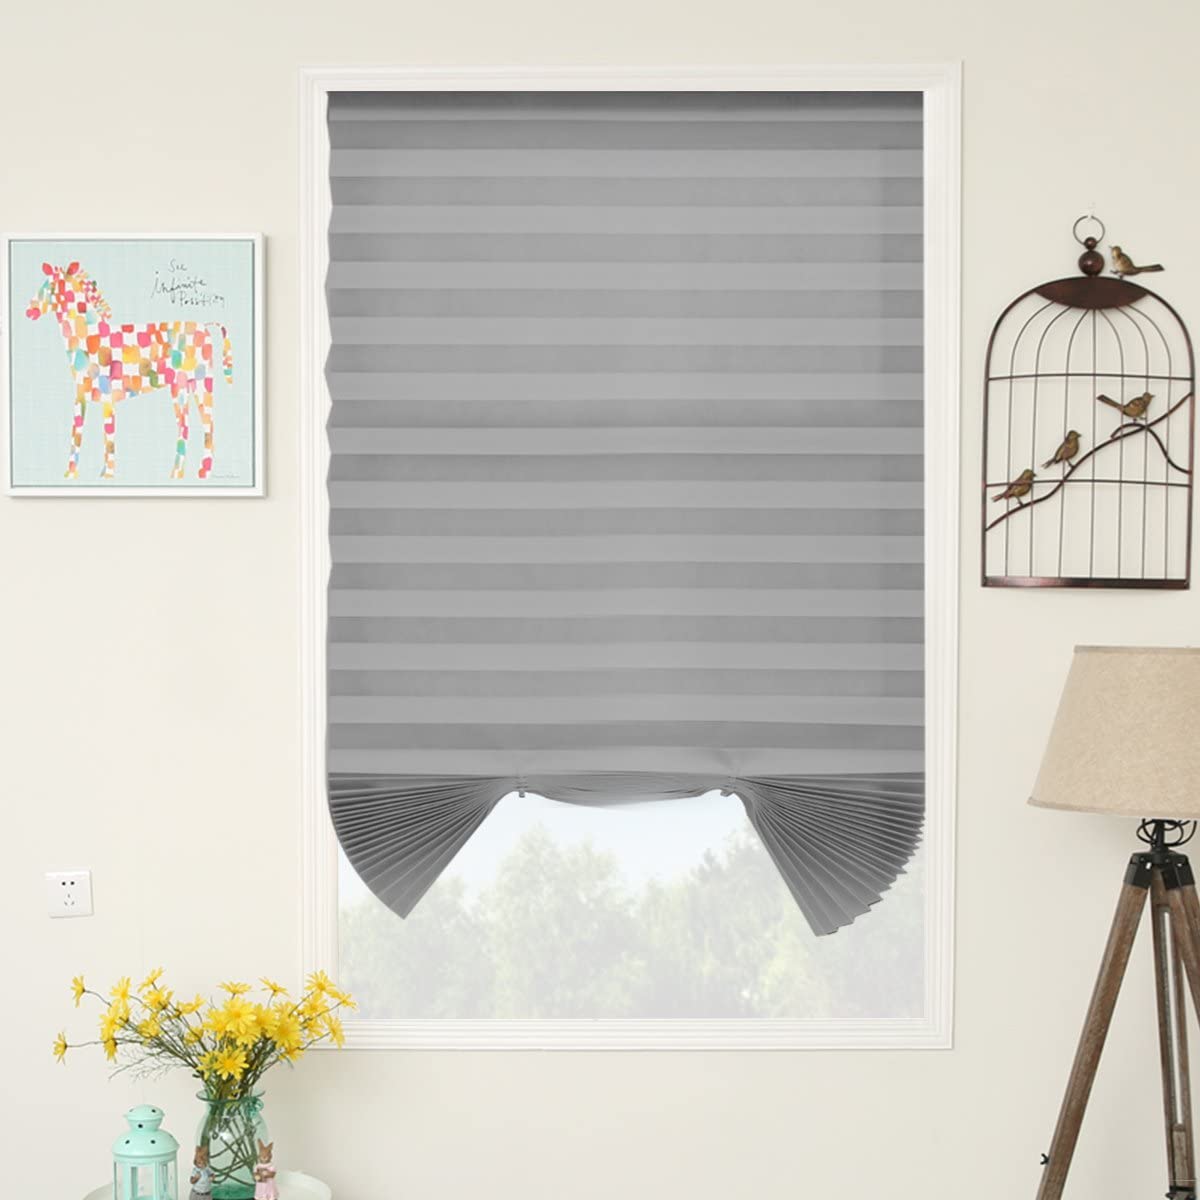 New Design Paper Shade With Great Price,Temporary Blinds Paper Shade,Paper Shade Direct Supplier in China